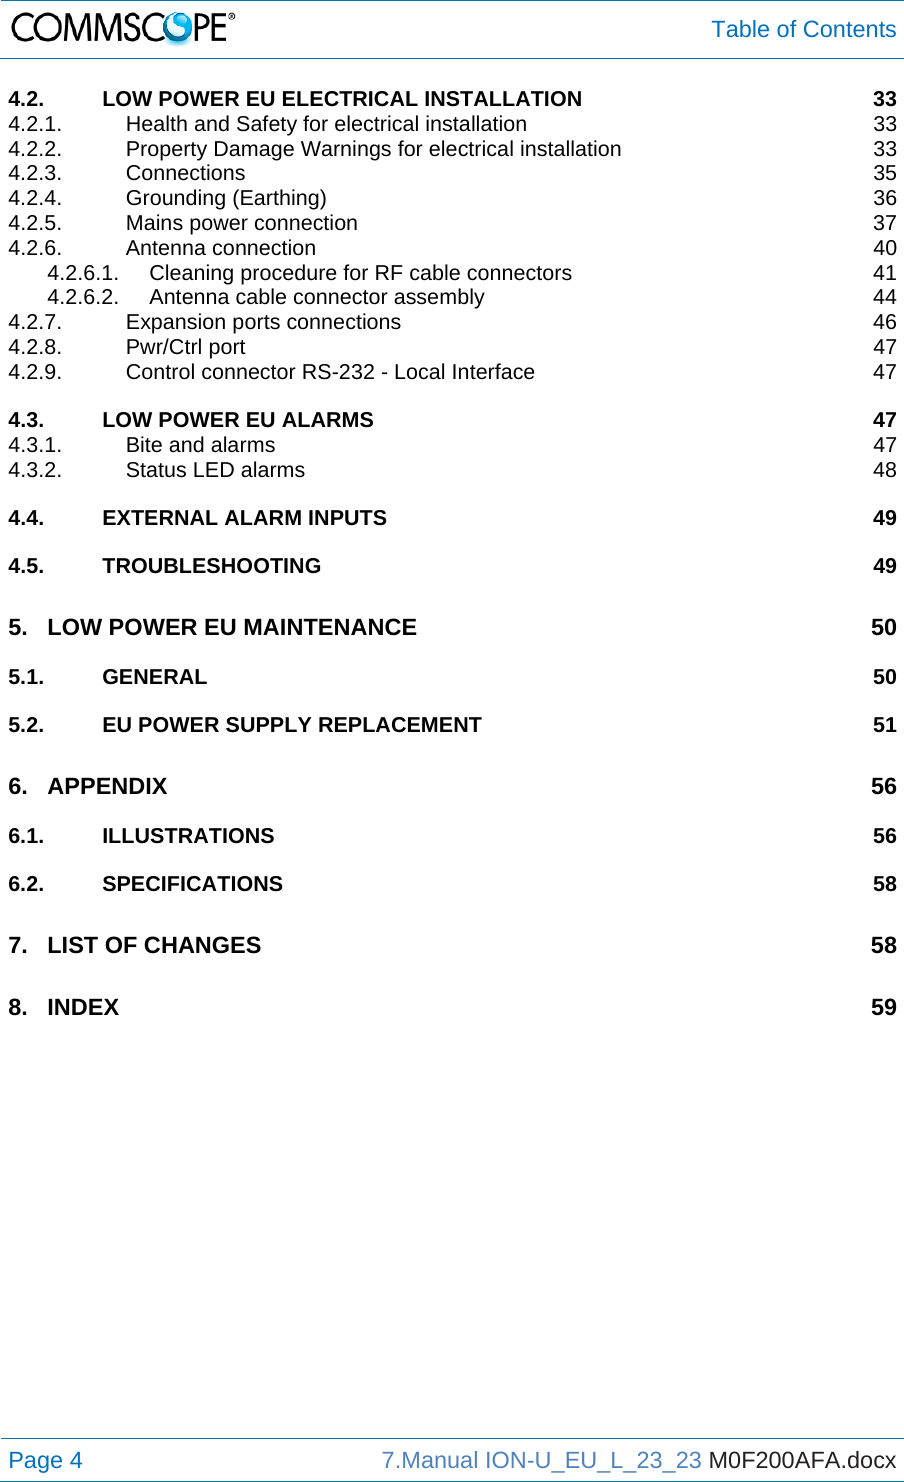  Table of Contents Page 4  7.Manual ION-U_EU_L_23_23 M0F200AFA.docx  4.2.LOW POWER EU ELECTRICAL INSTALLATION  334.2.1.Health and Safety for electrical installation  334.2.2.Property Damage Warnings for electrical installation  334.2.3.Connections 354.2.4.Grounding (Earthing)  364.2.5.Mains power connection  374.2.6.Antenna connection  404.2.6.1.Cleaning procedure for RF cable connectors  414.2.6.2.Antenna cable connector assembly  444.2.7.Expansion ports connections  464.2.8.Pwr/Ctrl port  474.2.9.Control connector RS-232 - Local Interface  474.3.LOW POWER EU ALARMS  474.3.1.Bite and alarms  474.3.2.Status LED alarms  484.4.EXTERNAL ALARM INPUTS  494.5.TROUBLESHOOTING 495.LOW POWER EU MAINTENANCE  505.1.GENERAL 505.2.EU POWER SUPPLY REPLACEMENT  516.APPENDIX 566.1.ILLUSTRATIONS 566.2.SPECIFICATIONS 587.LIST OF CHANGES  588.INDEX 59 